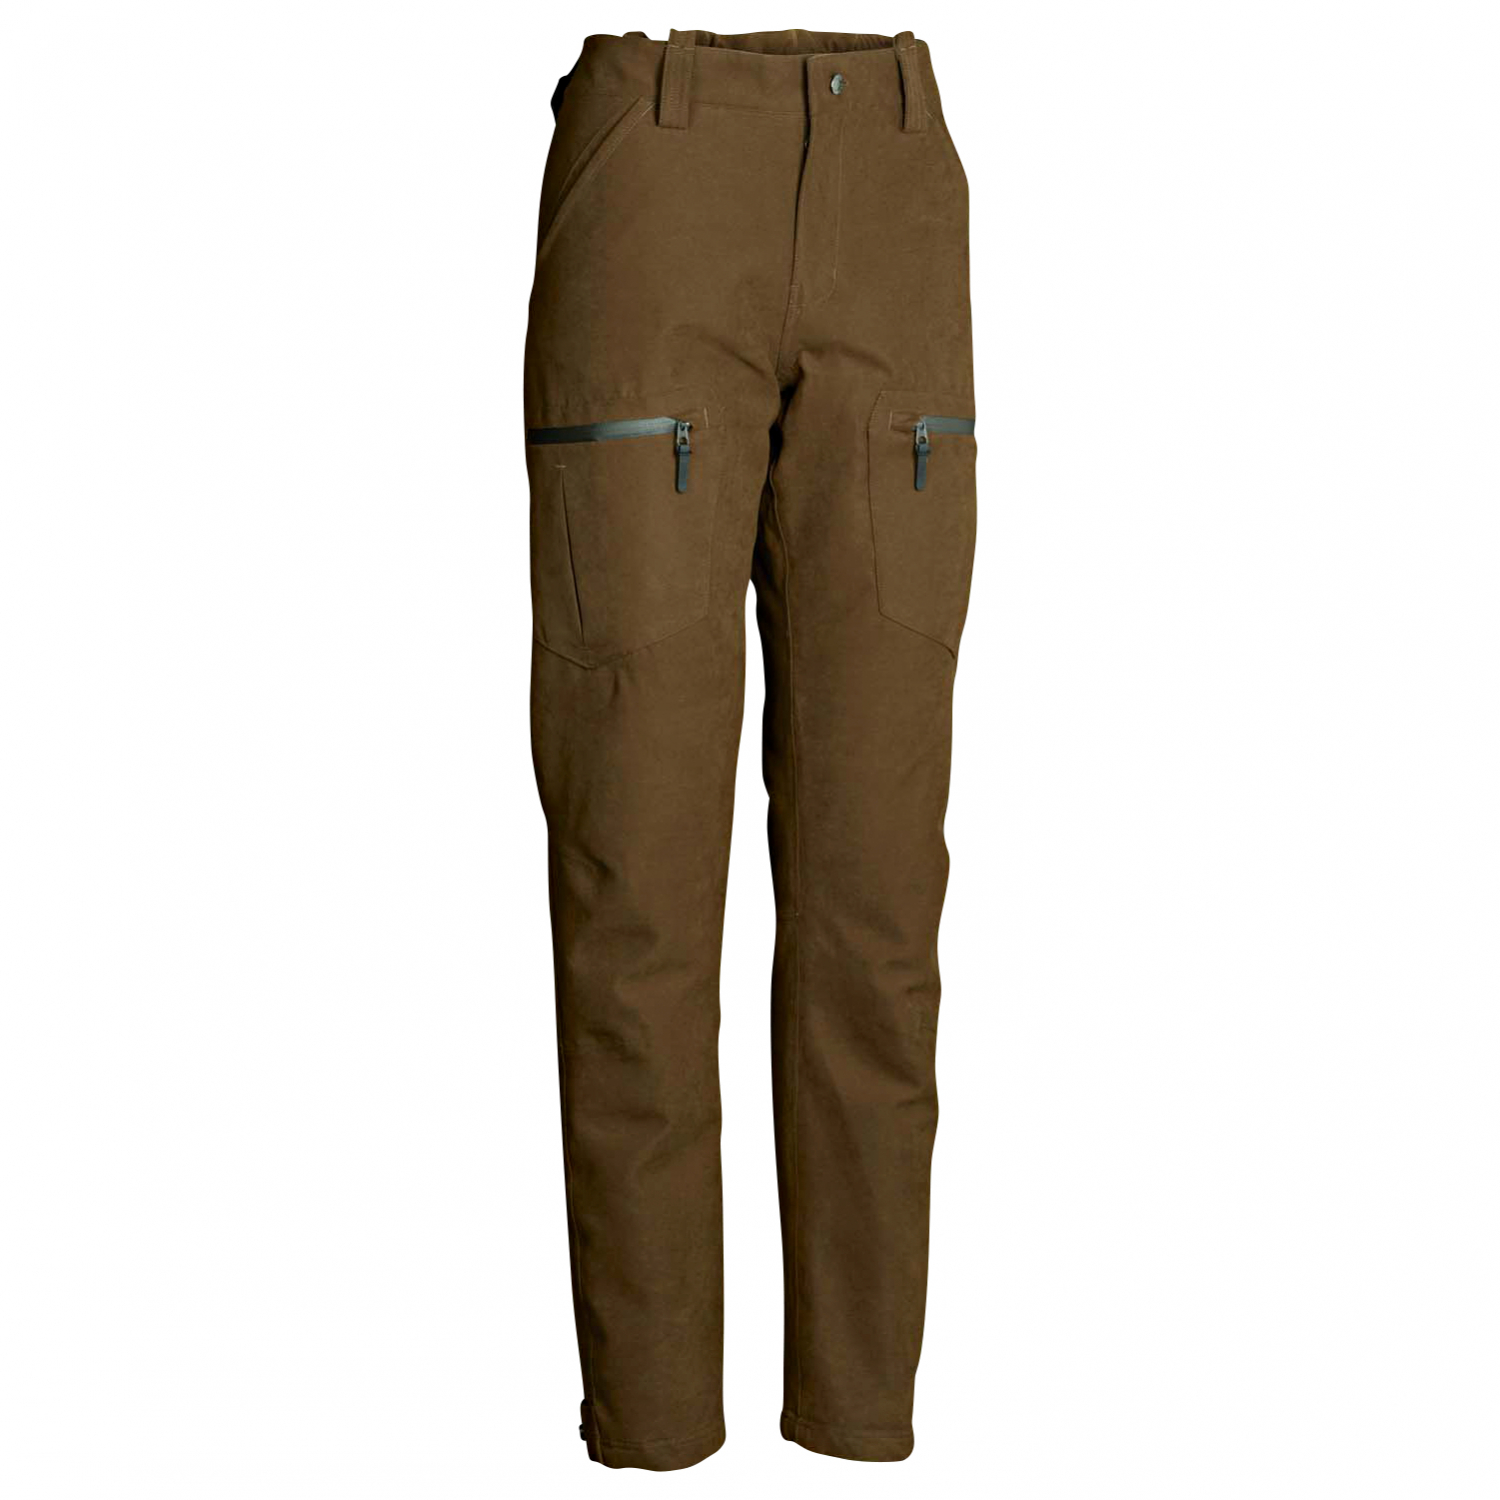 Northern Hunting Womens Hunting Trousers Elk Svana at low prices